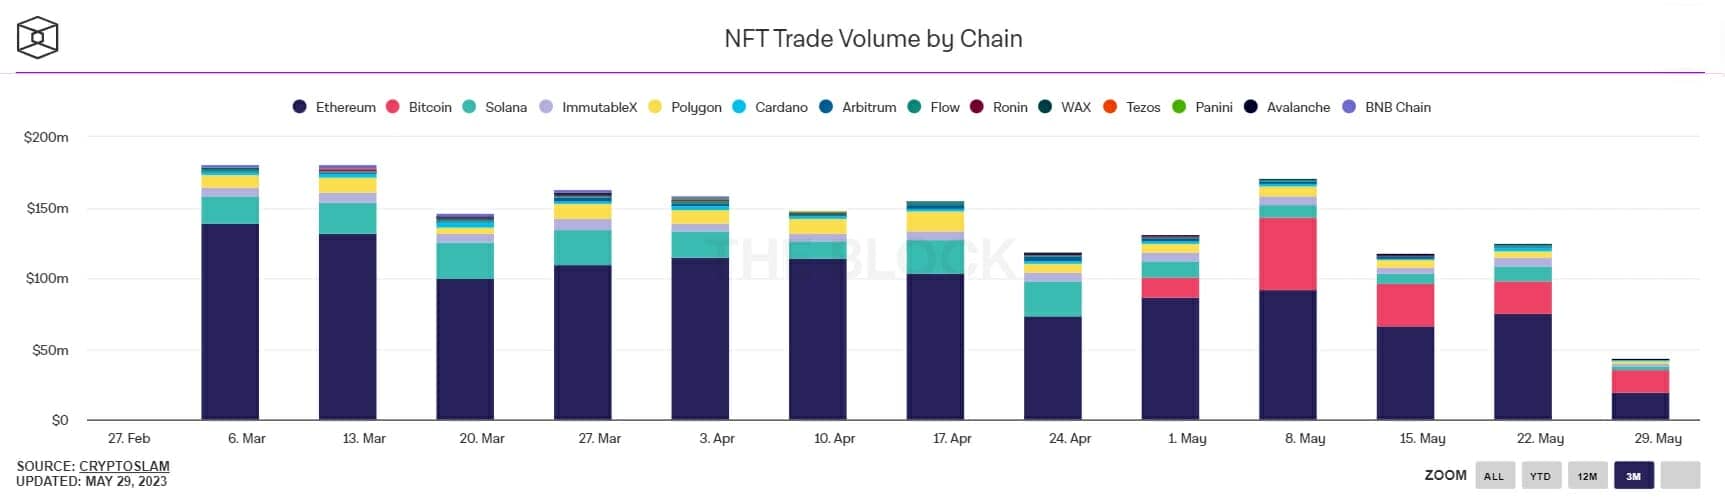 The Bitcoin blockchain sees its use explode in May for NFT transactions.  It ranks second behind Ethereum.